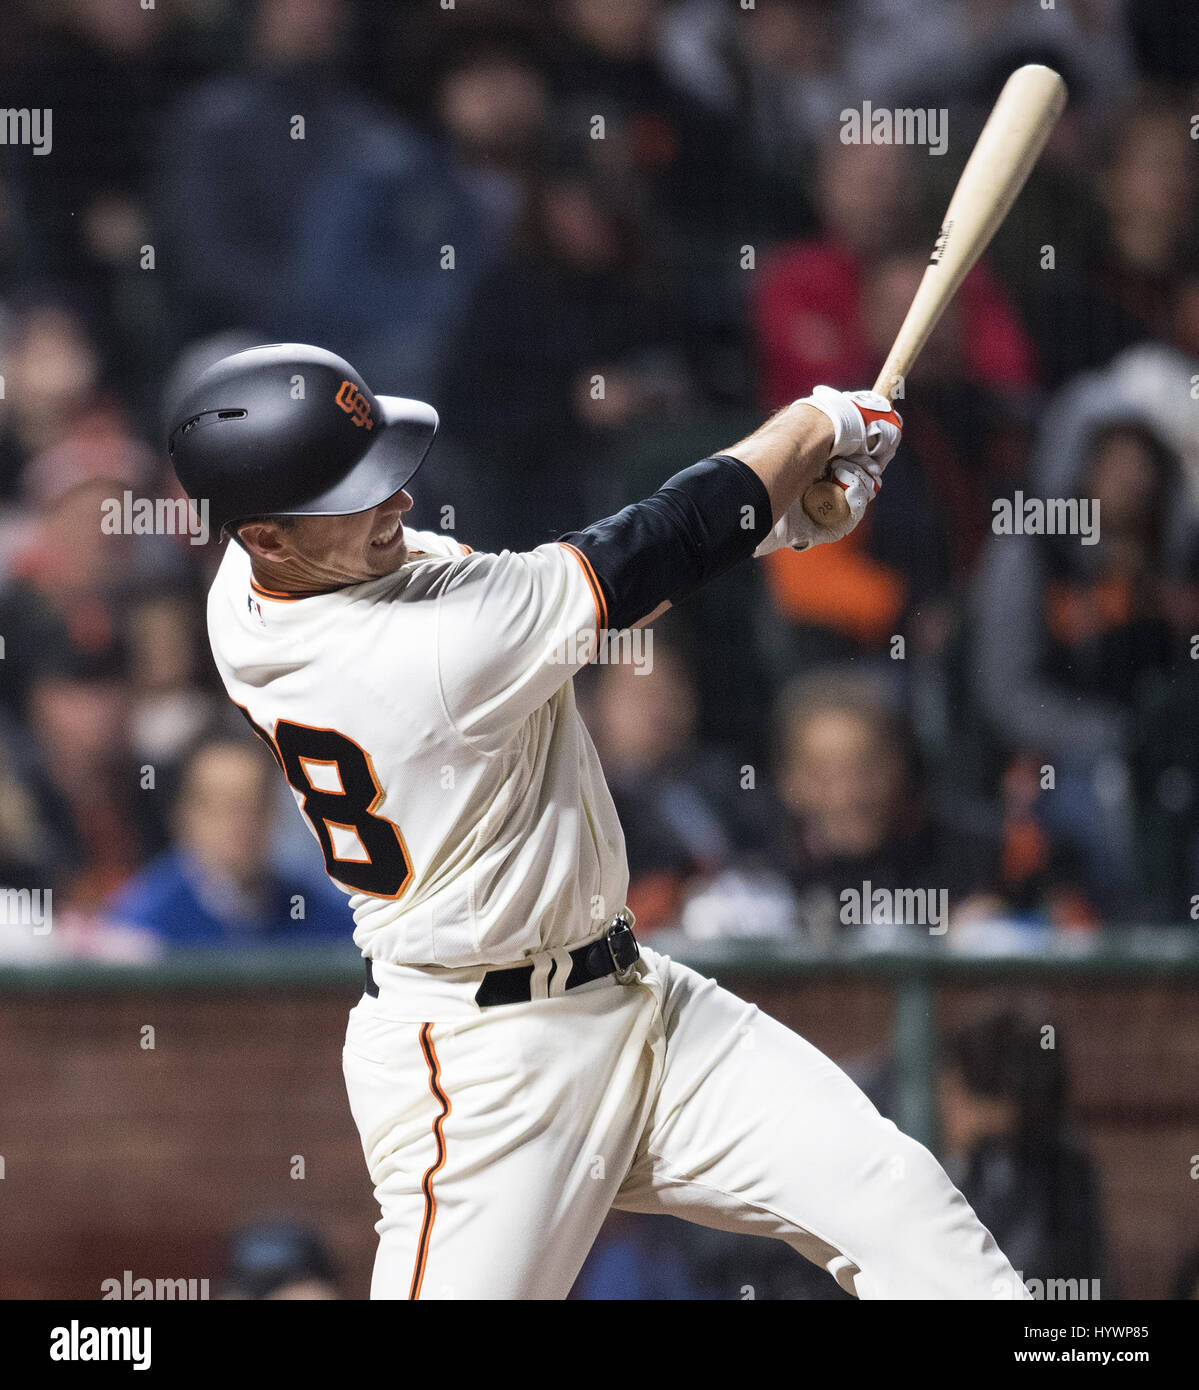 San Francisco, California, USA. 26th Apr, 2017. Teeth clenched, San Francisco Giants catcher Buster Posey (28) at the plate during a MLB baseball game between the Los Angeles Dodgers and the San Francisco Giants at AT&T Park in San Francisco, California. Valerie Shoaps/CSM/Alamy Live News Stock Photo